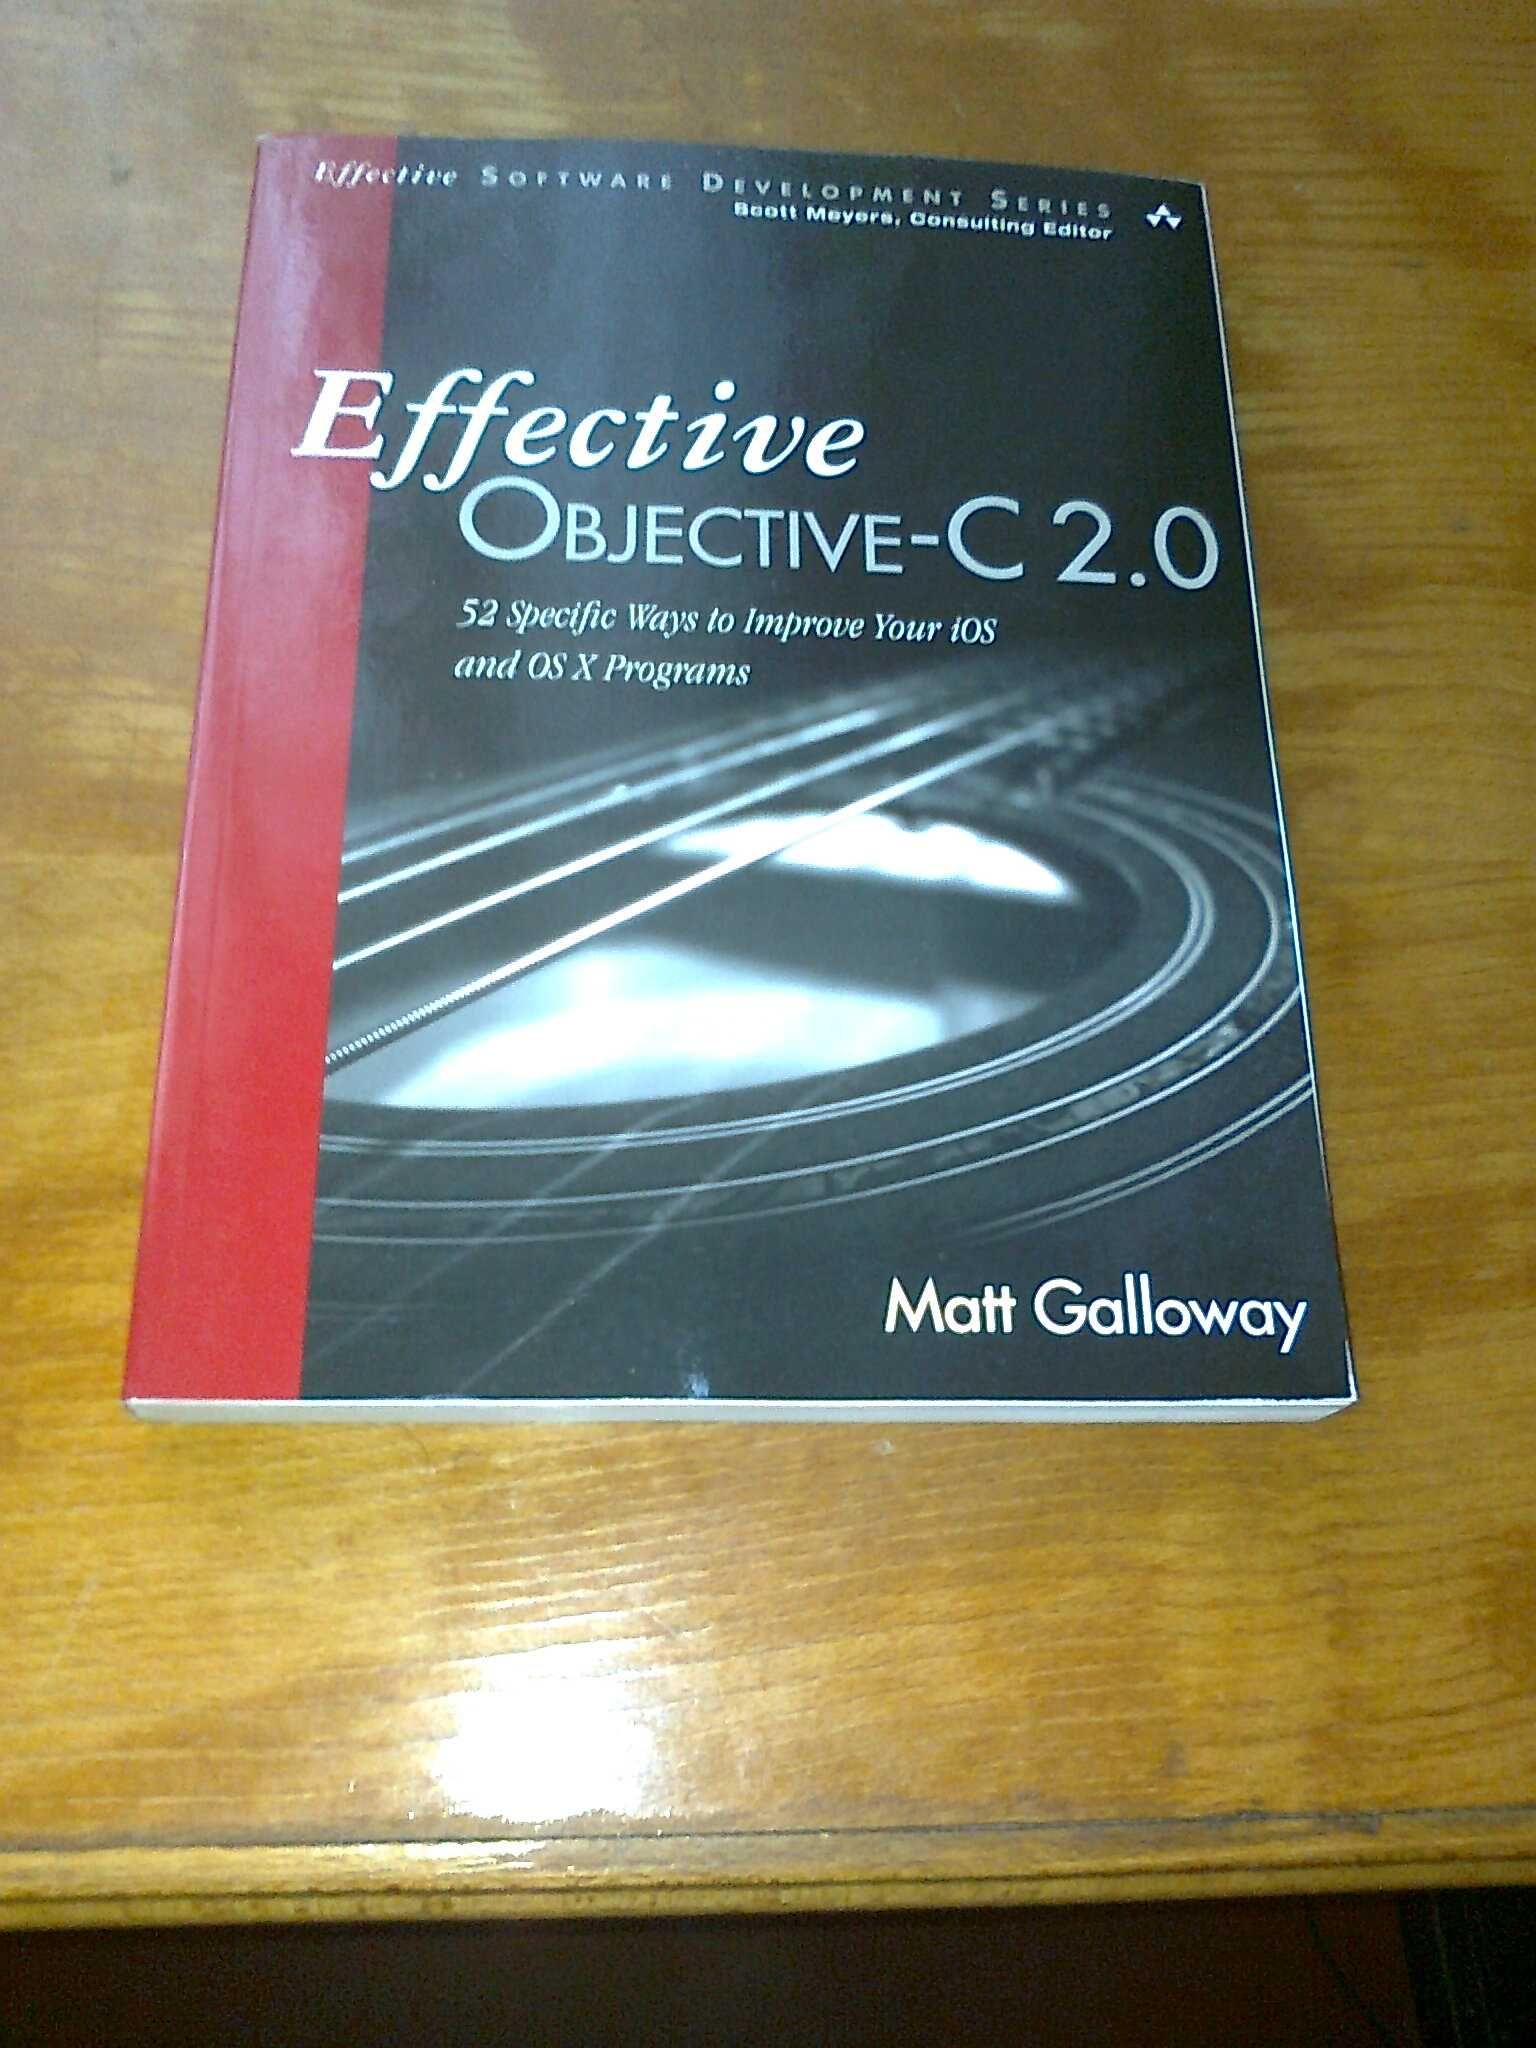 Effective Objective-C 2.0: 52 Specific Ways to Improve Your iOS & OS X